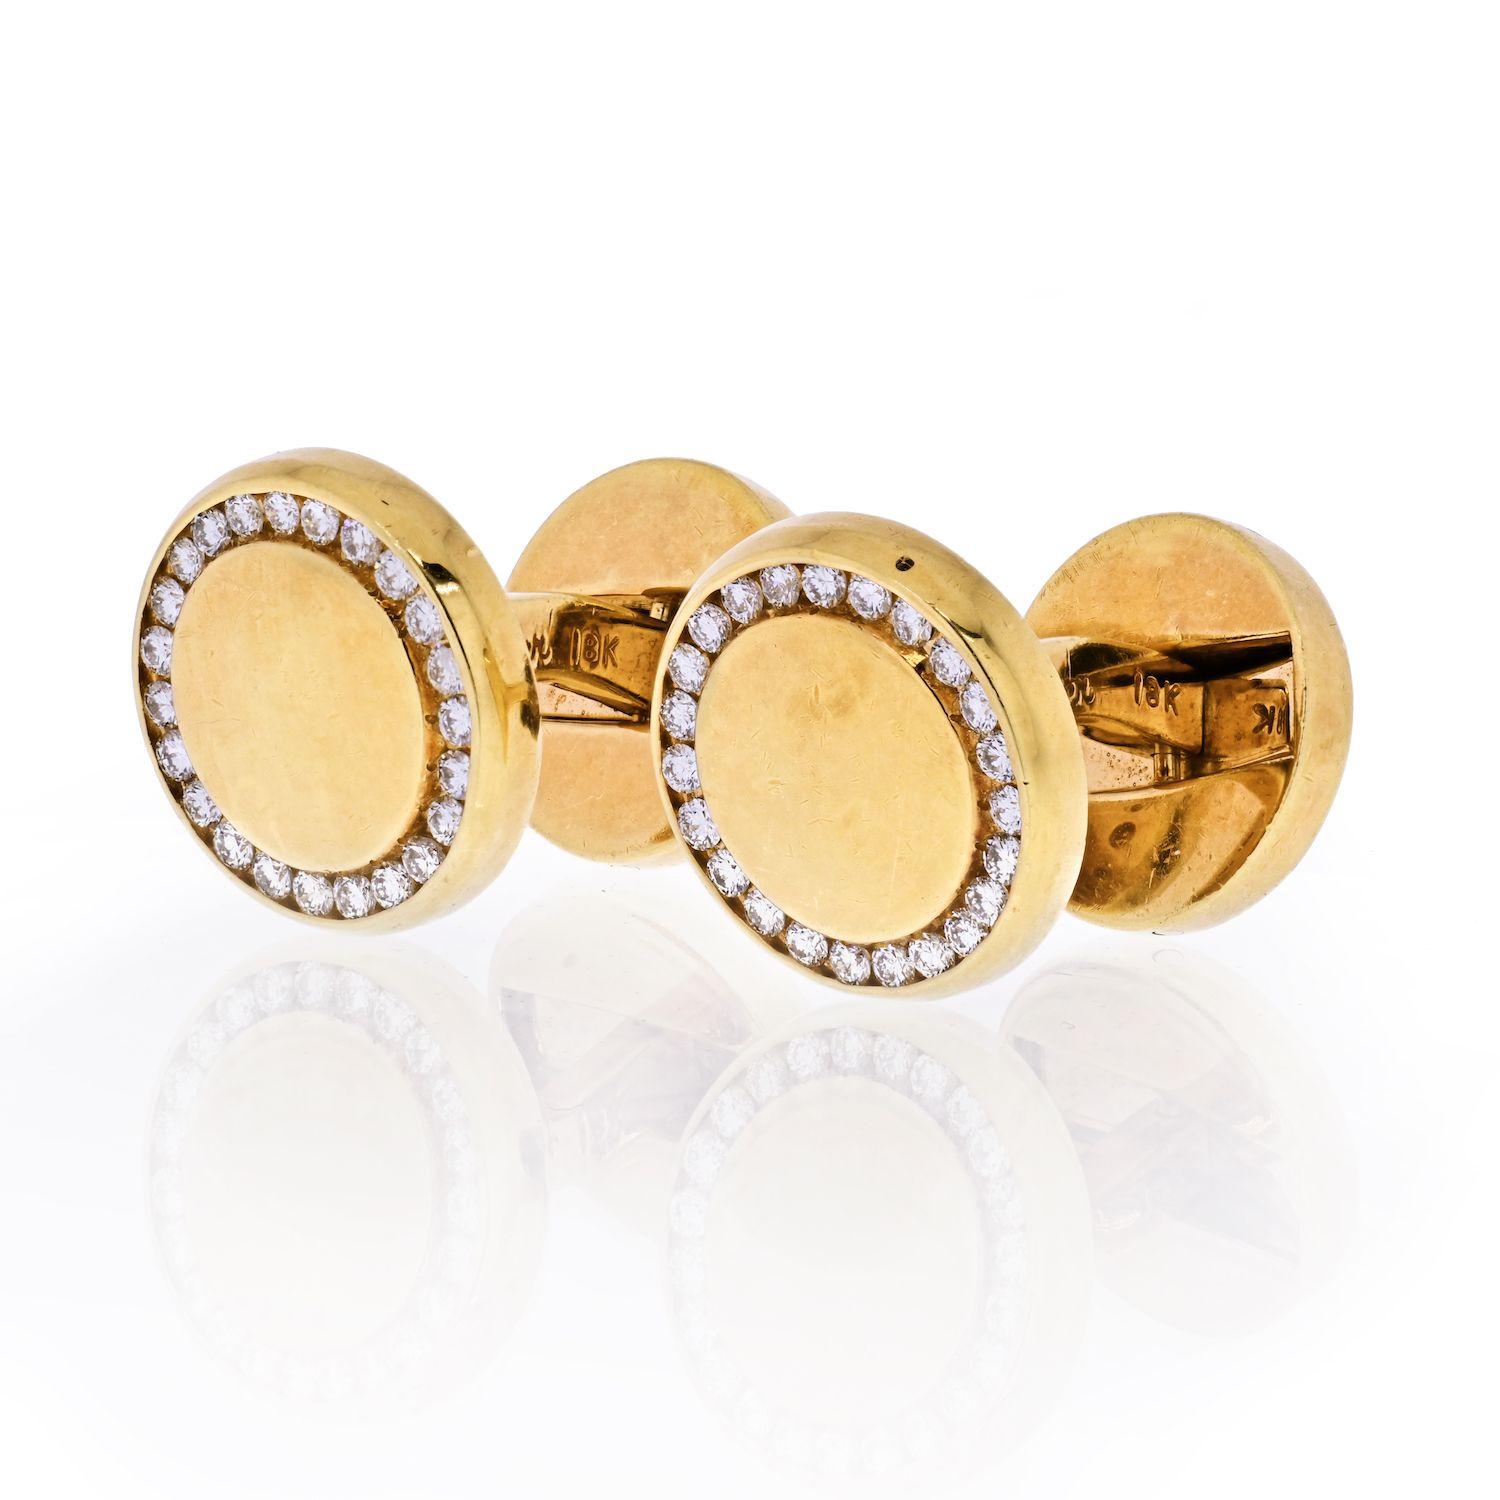 A good pair of 18K yellow gold diamond cufflinks, made in the 1980s by Cartier. 
Round Cut Diaonds: 1.25cttw.
Diamond Quality: F-G color VS1-VS2 clarity
Hallmarked. 
